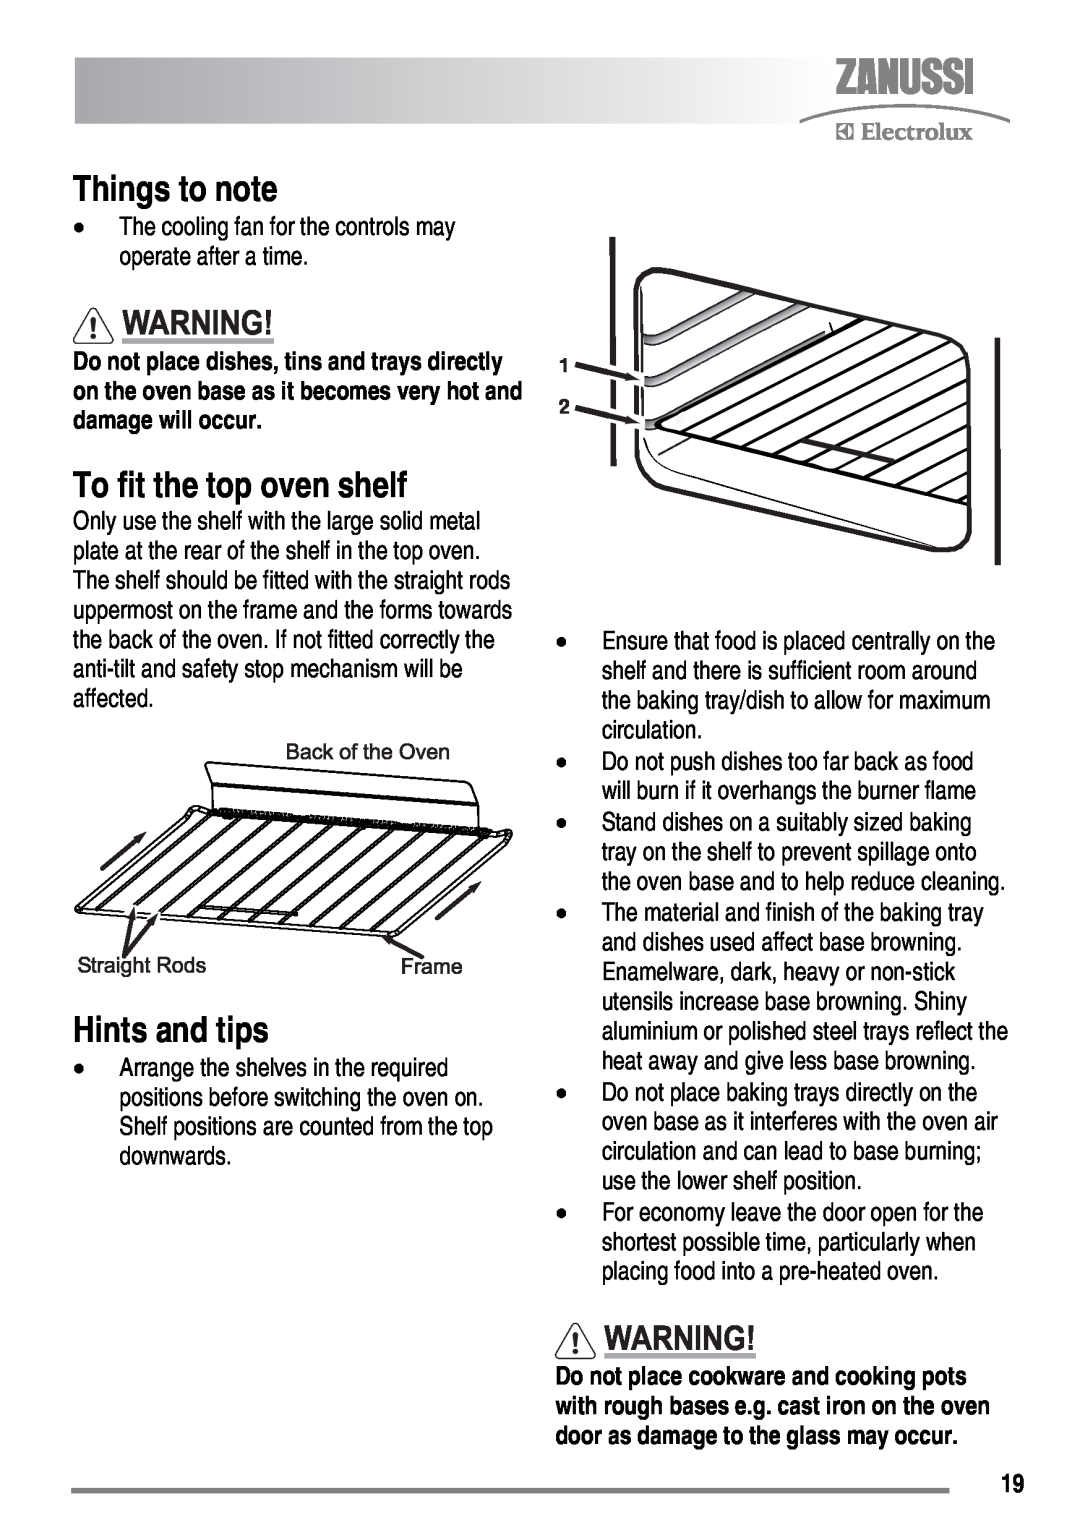 Zanussi ZKG6040 user manual To fit the top oven shelf, Things to note, Hints and tips 